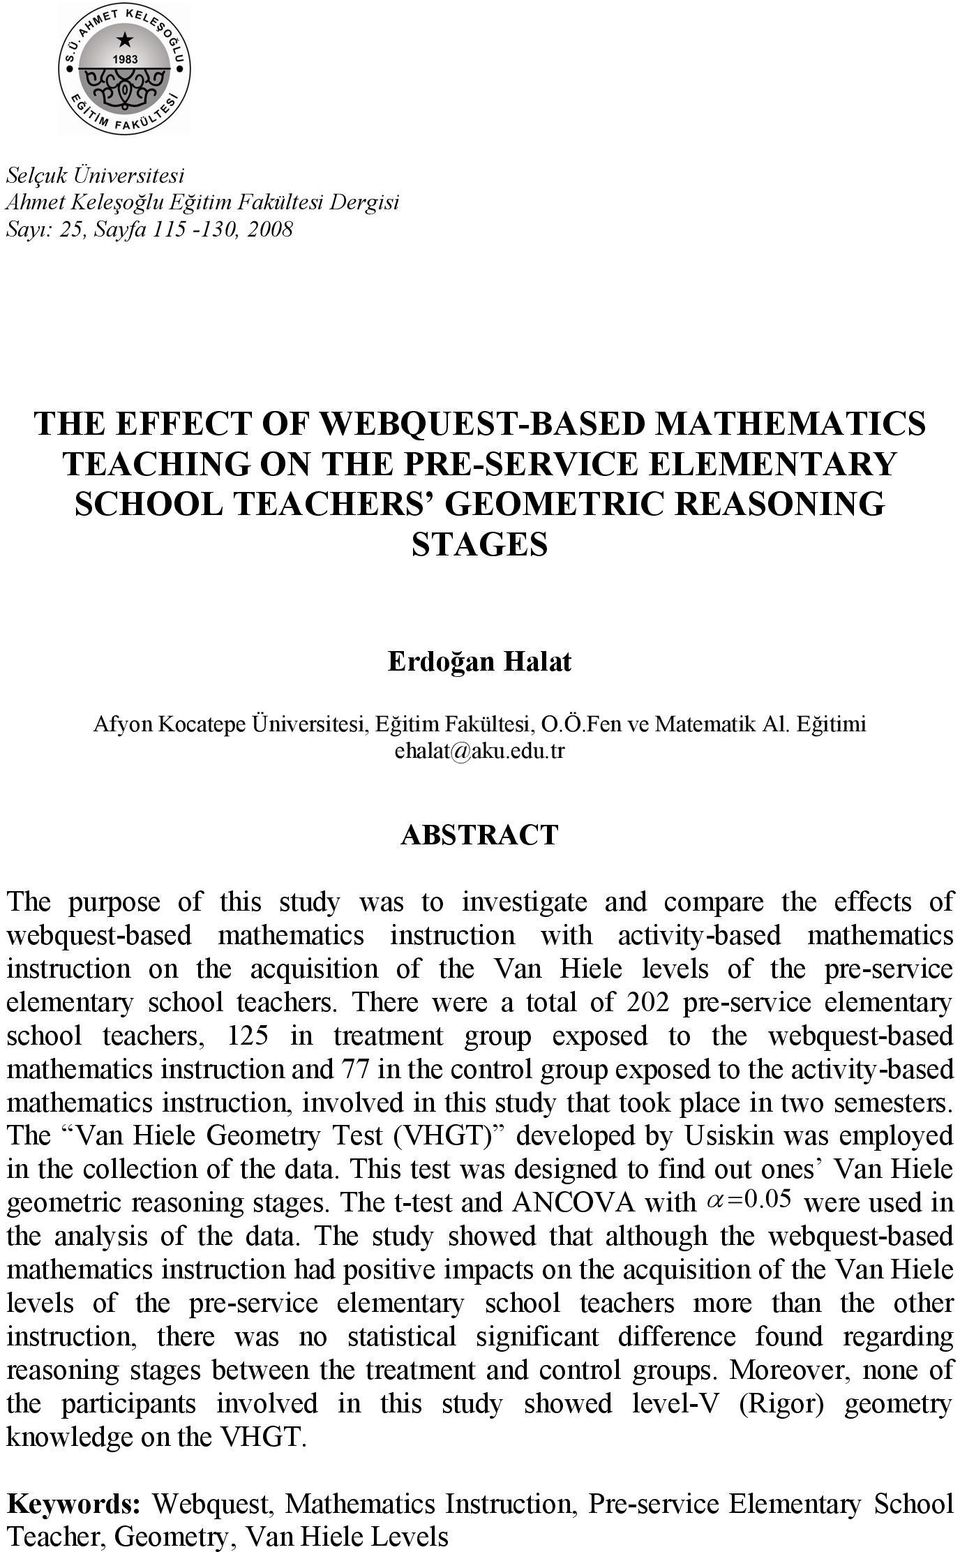 tr ABSTRACT The purpose of this study was to investigate and compare the effects of webquest-based mathematics instruction with activity-based mathematics instruction on the acquisition of the Van